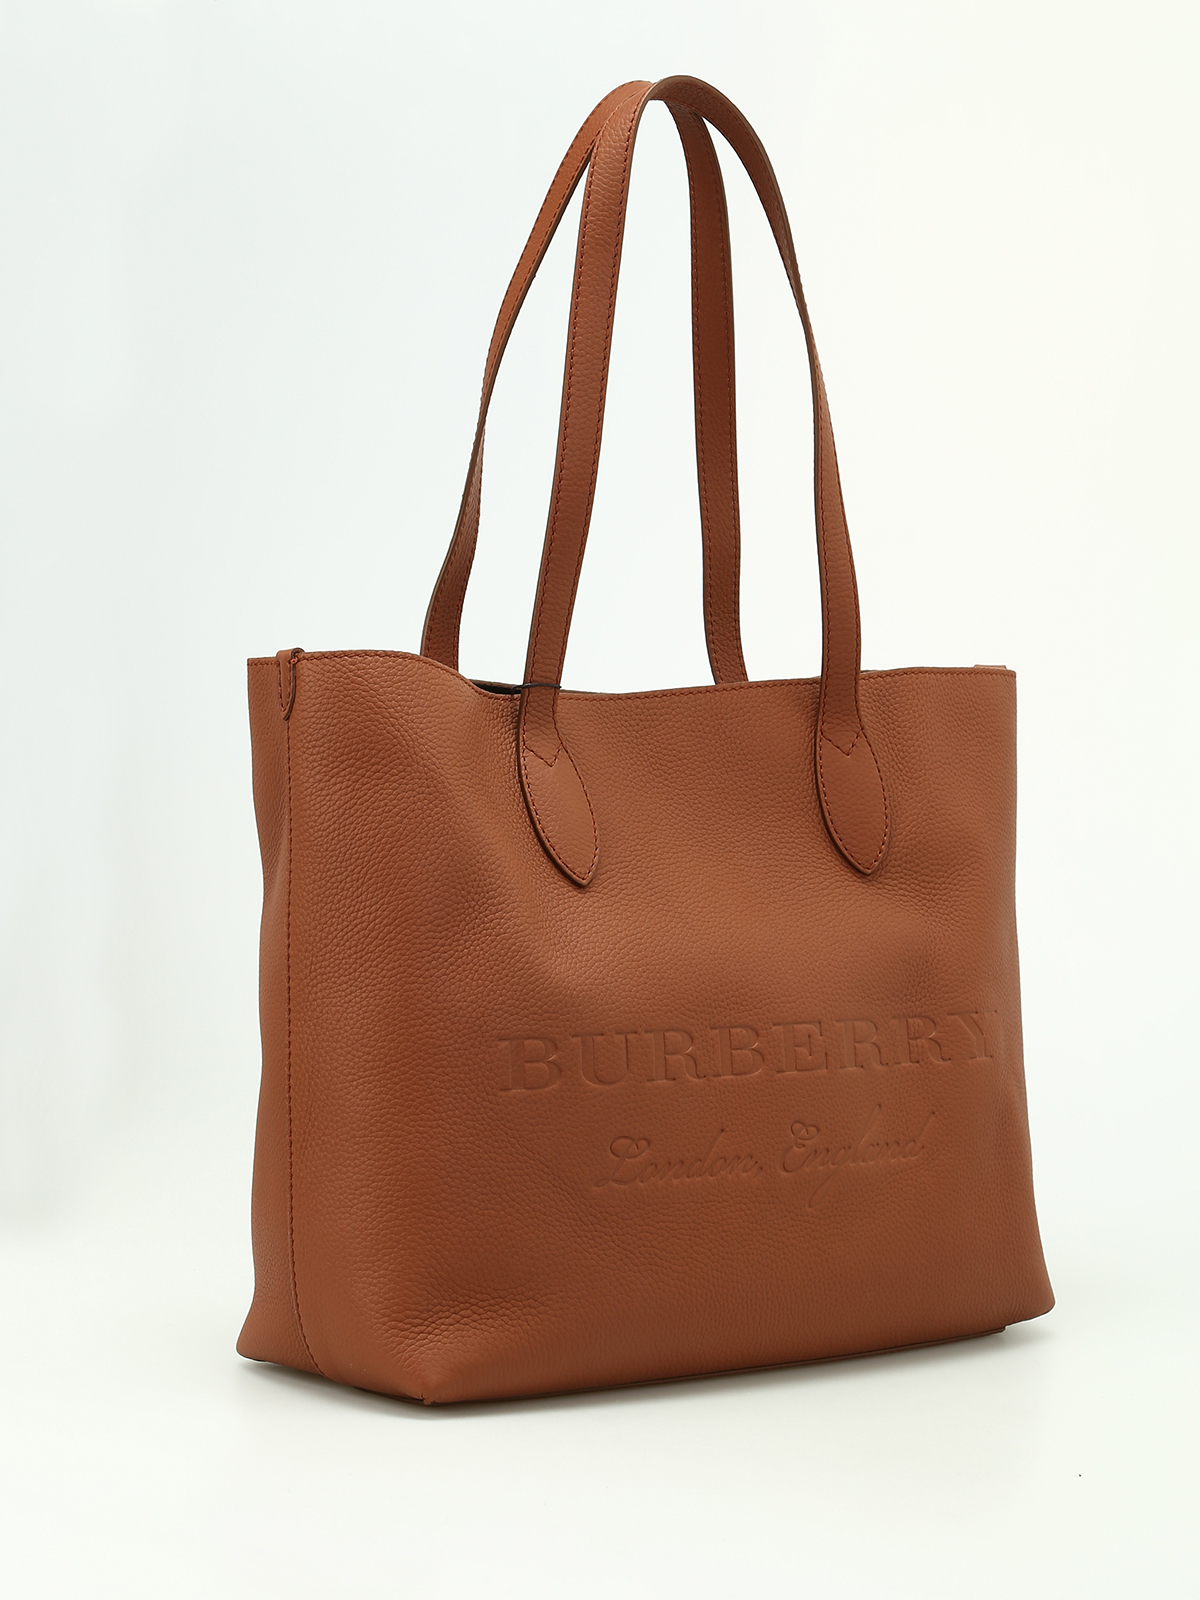 Brown Leather Tote Bags On Sale | Confederated Tribes of the Umatilla Indian Reservation